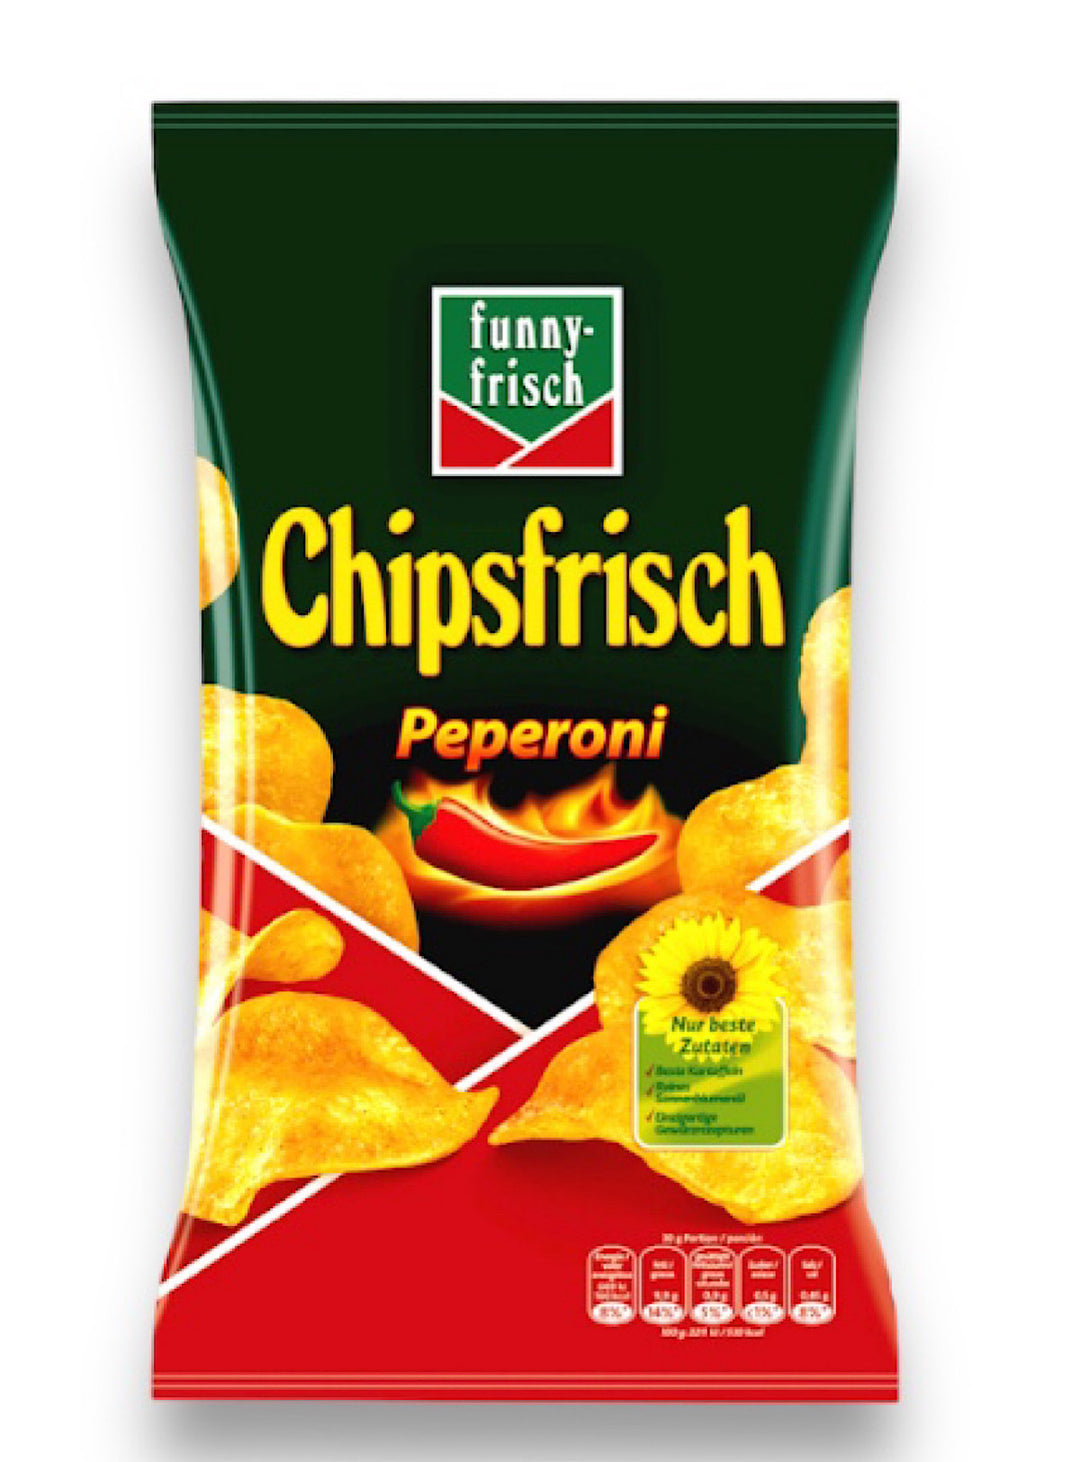 Pepperoni Potato Chips - Funny Frisch - 150g